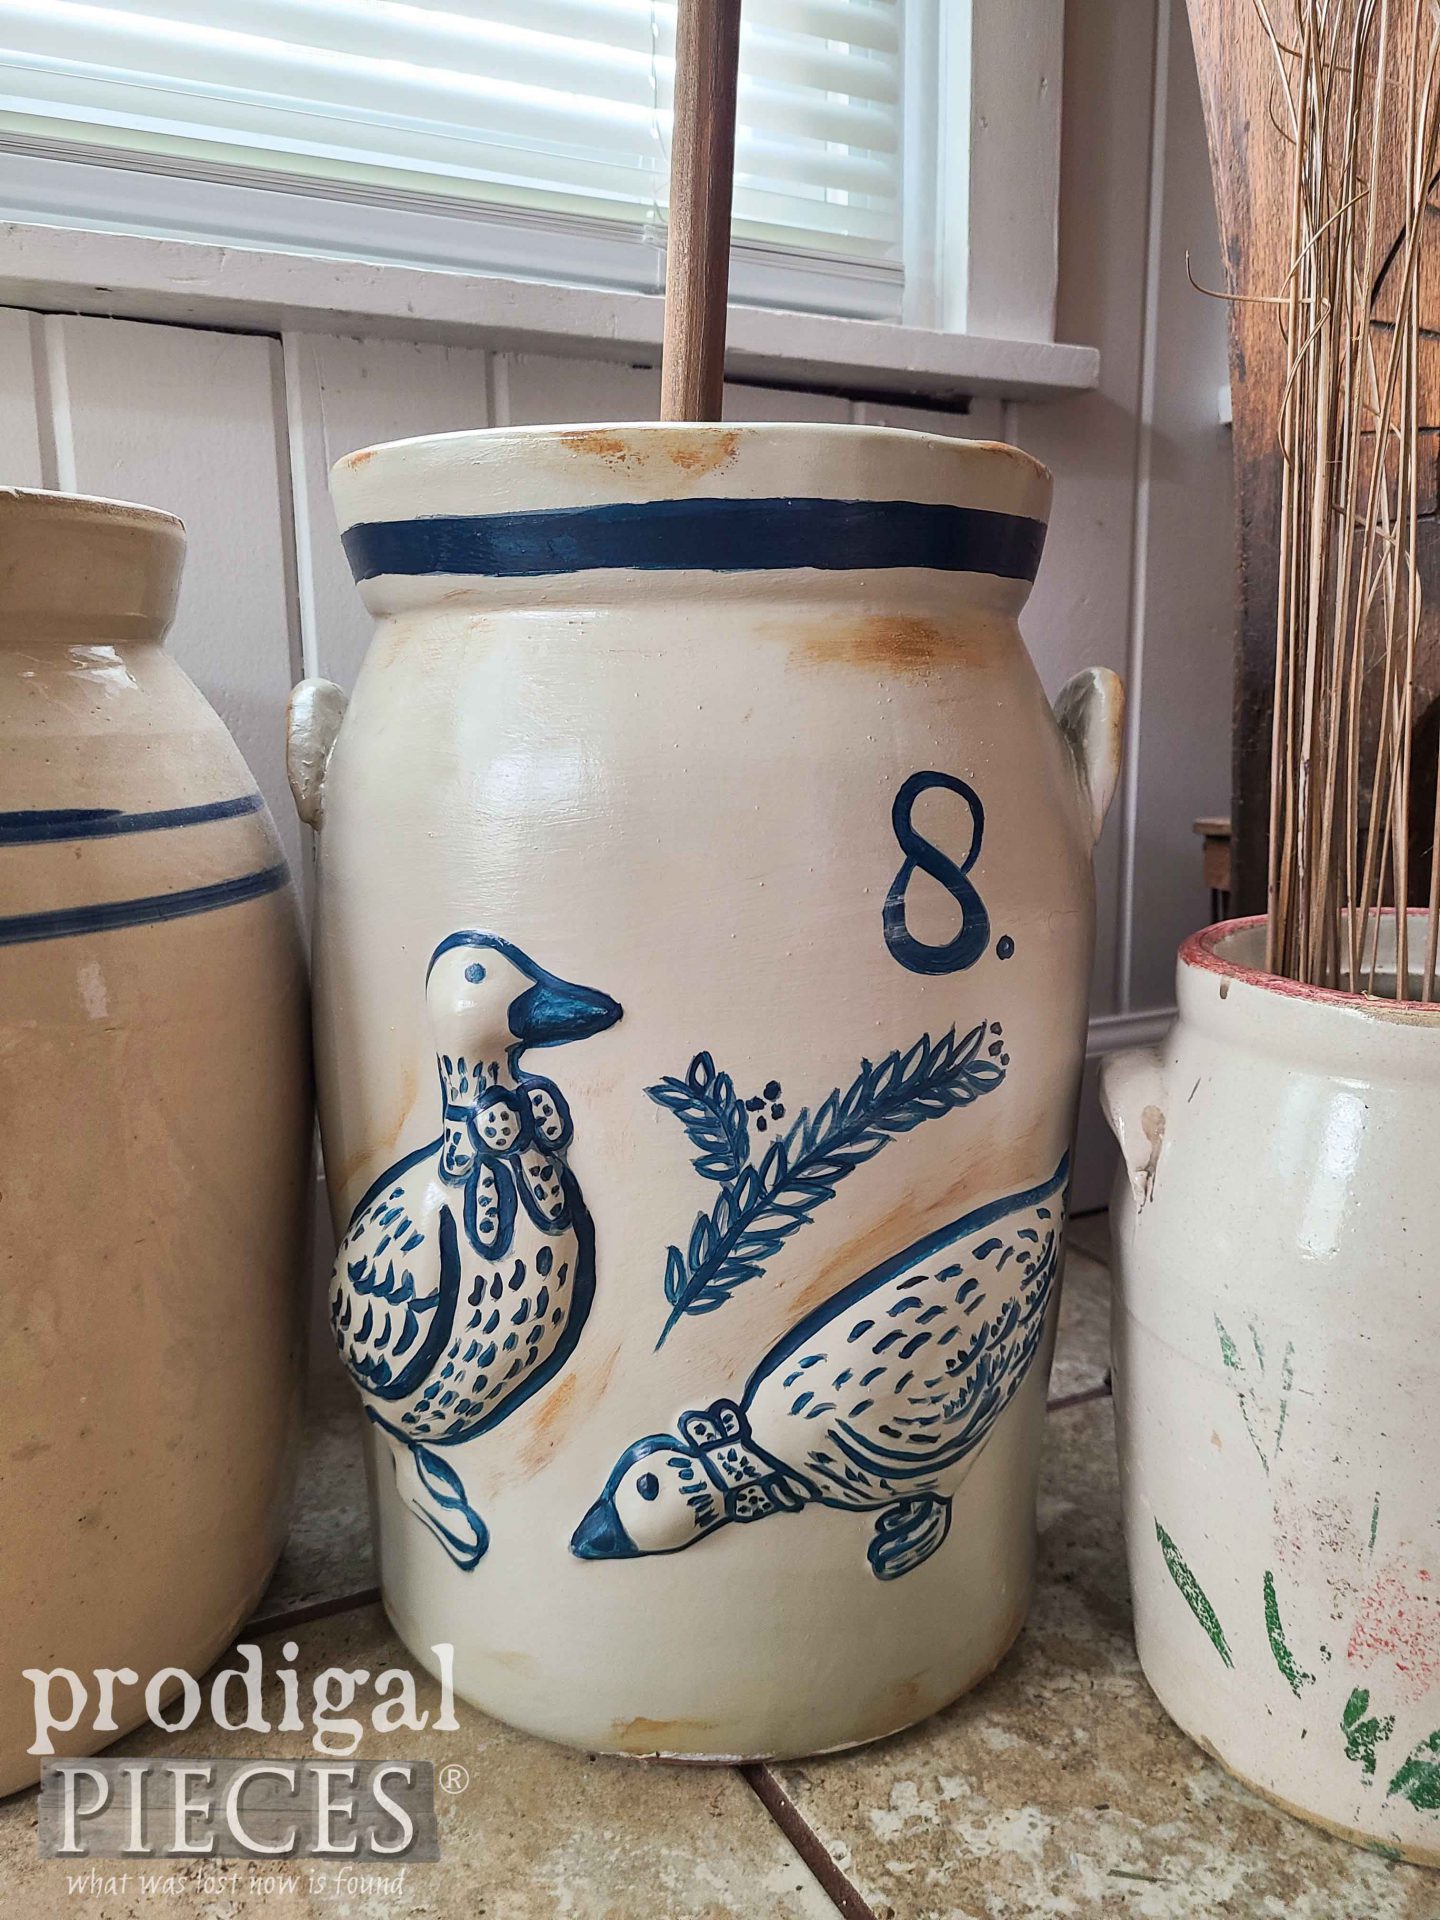 Cobalt Blue Ceramic Crock Butter Churn | How to Paint Ceramic by Larissa of Prodigal Pieces | prodigalpieces.com #prodigalpieces #howto #crafts #farmhouse